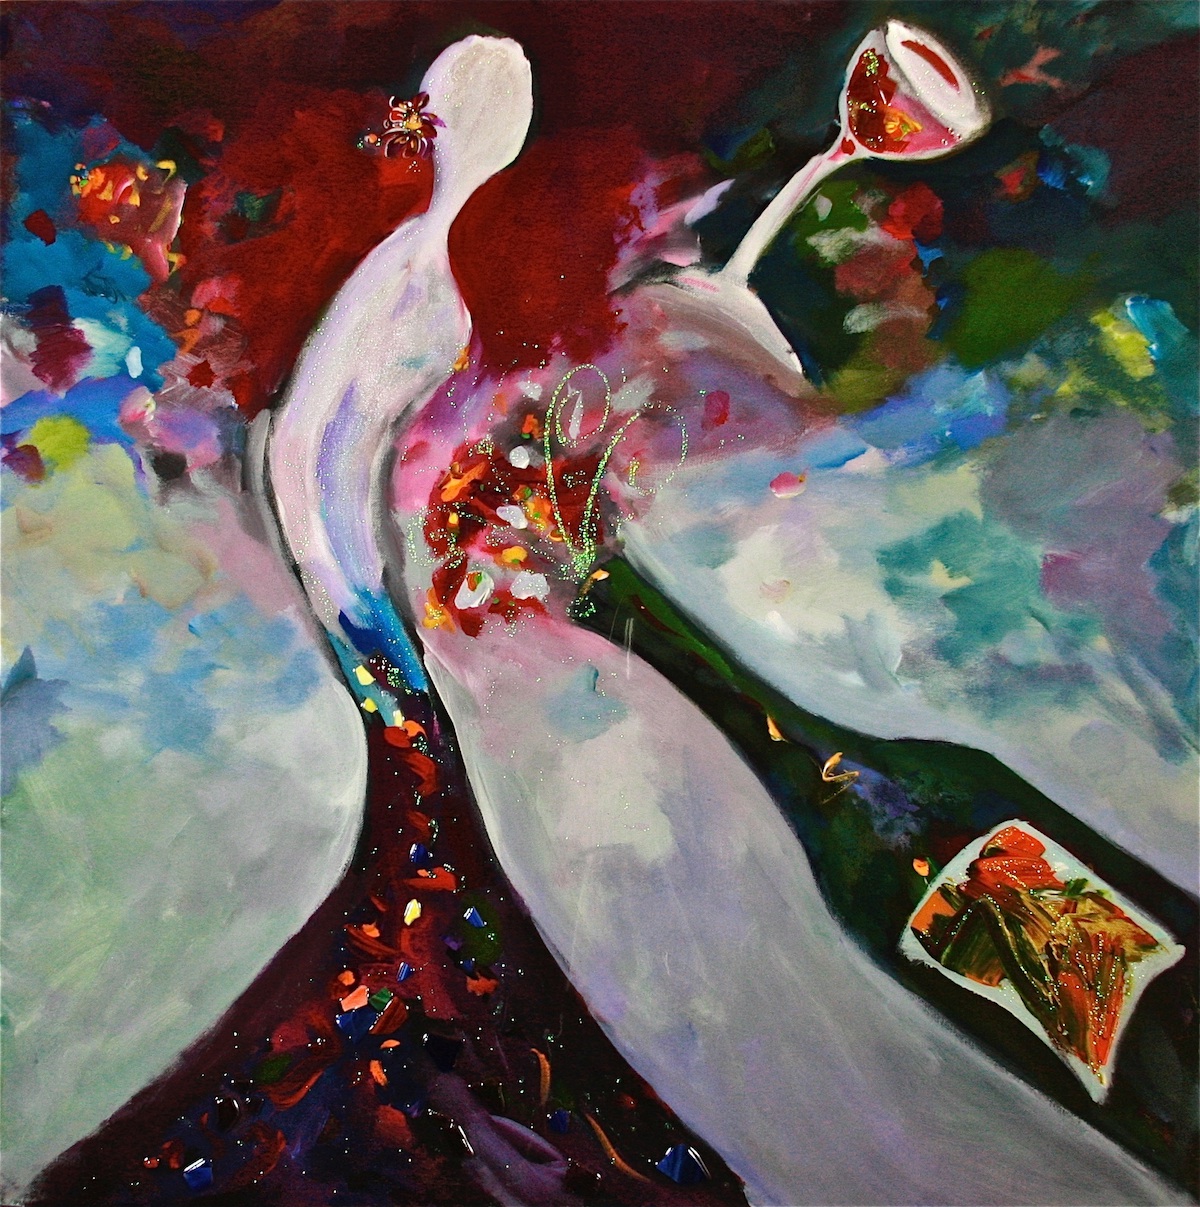 Goddess of Cabernet - Painting by Stephanie Schlatter